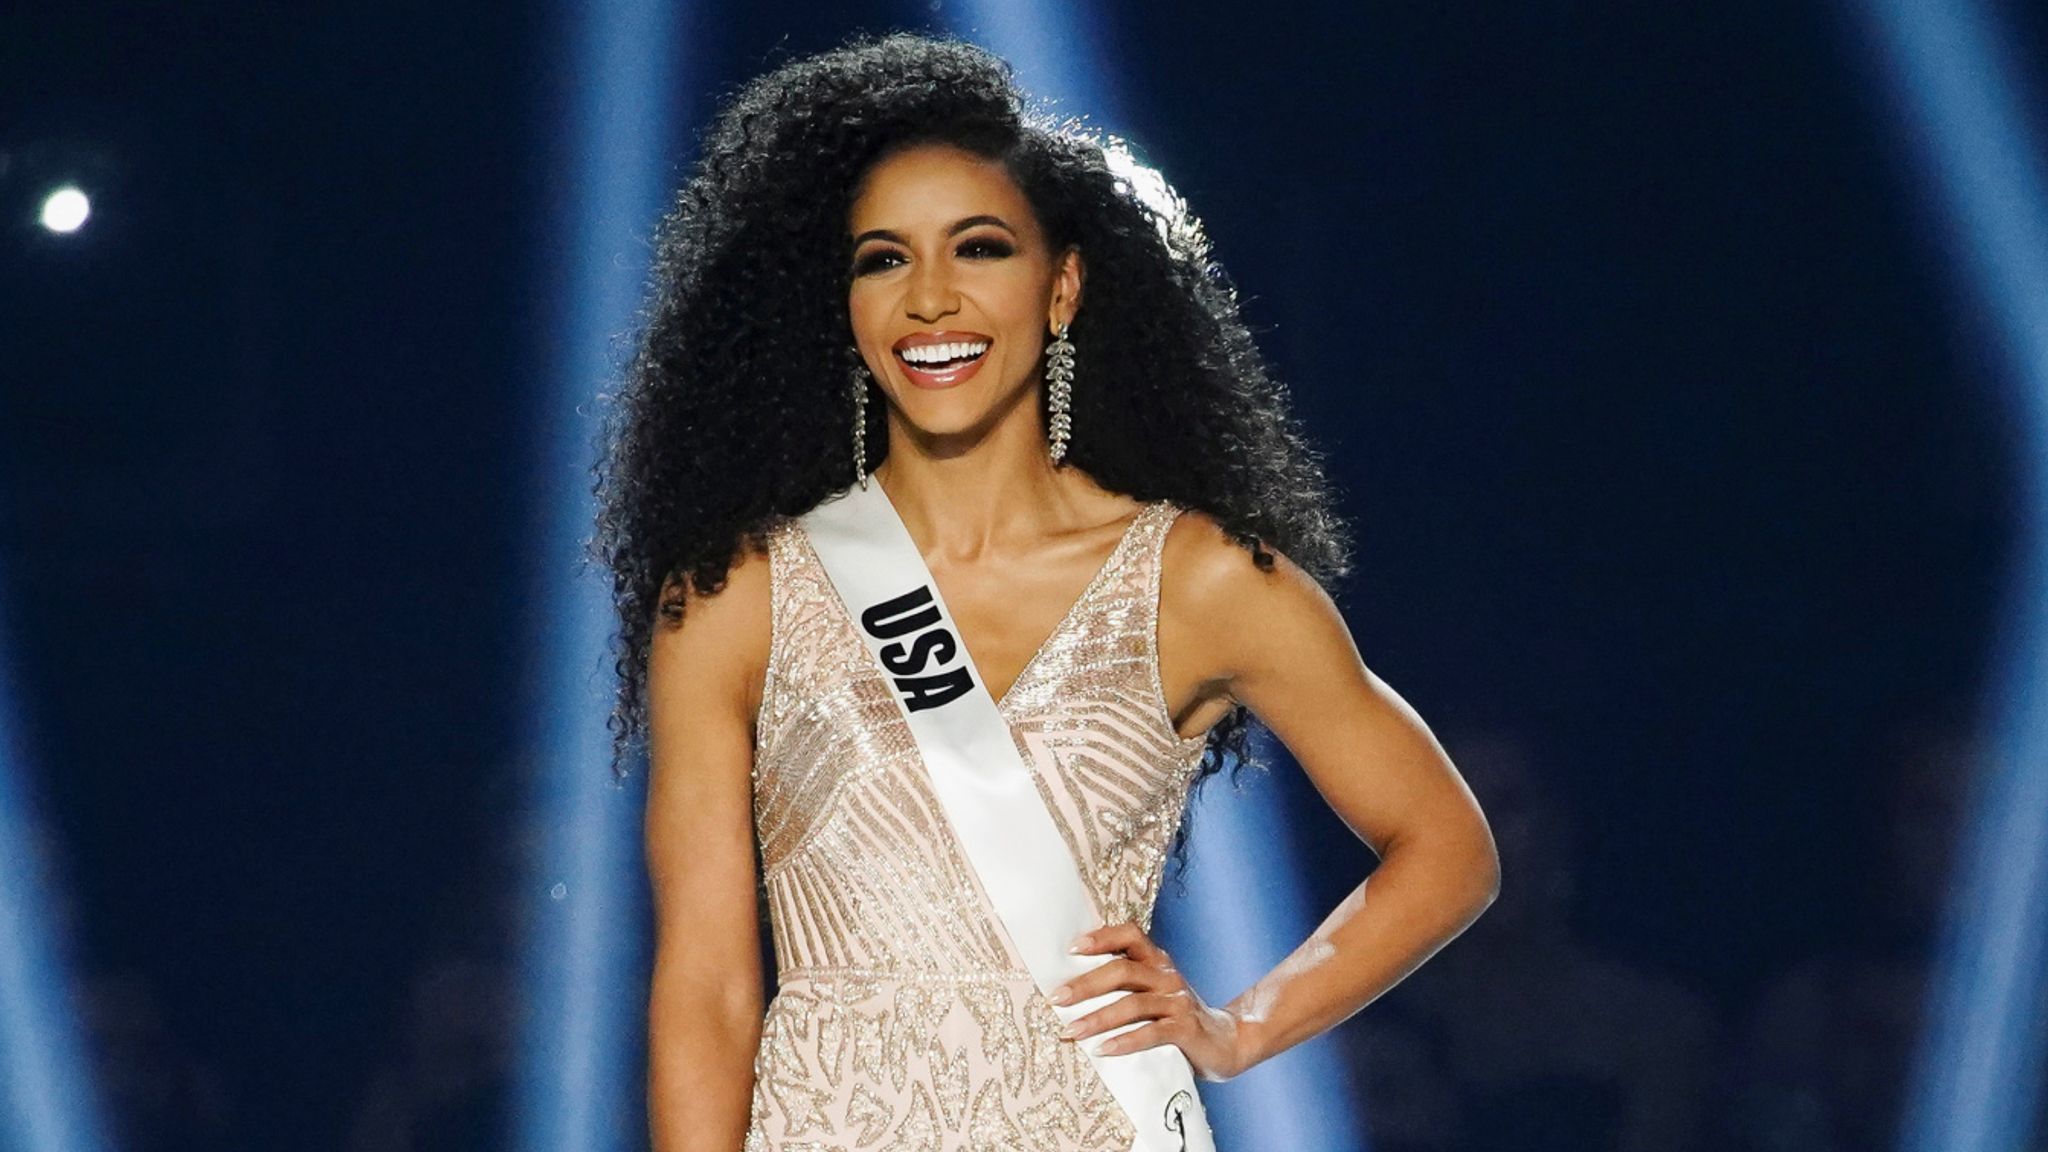 Cheslie Kryst competed in the Miss Universe pageant in 2019.